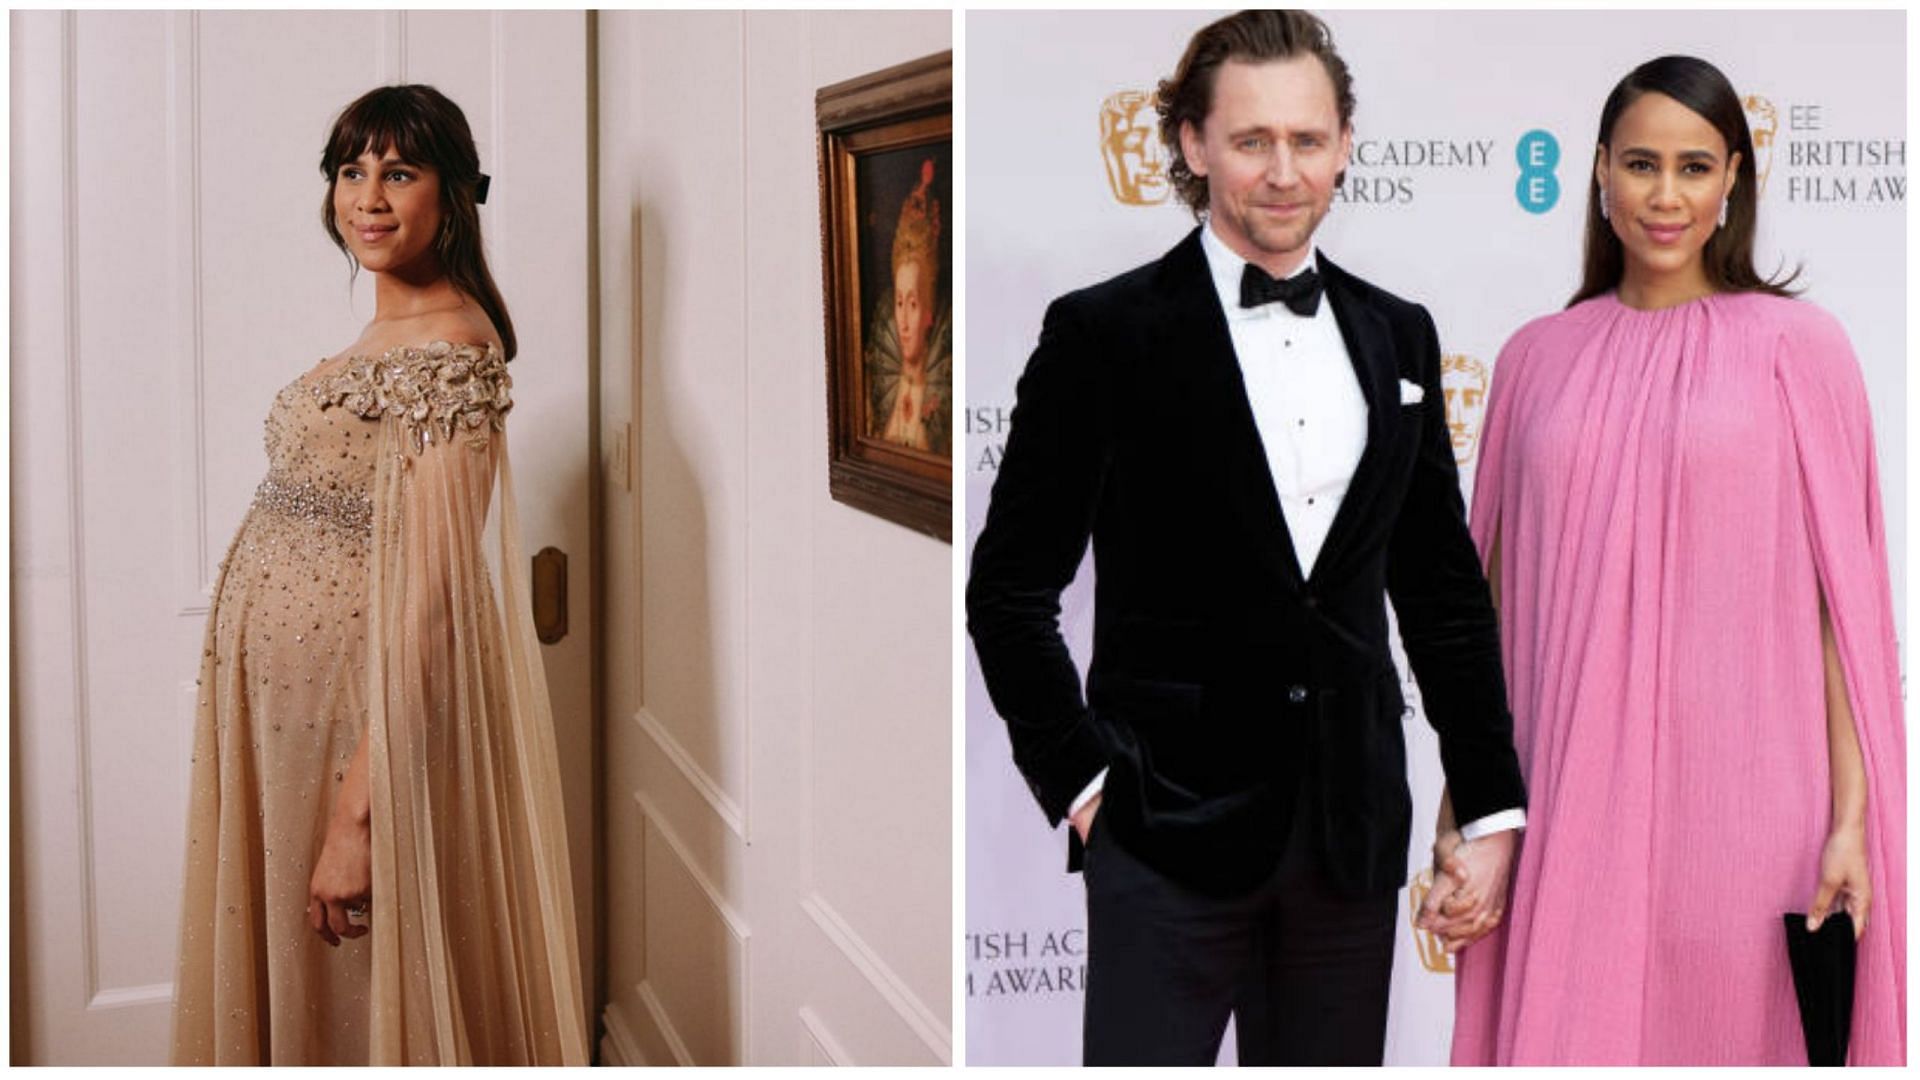 Tom Hiddleston&#039;s fiance, Zawe Ashton, debuted her baby bump at the premiere of her new movie (Image via @updatesofTH_/Twitter and Jeff Spicer/Getty Images)